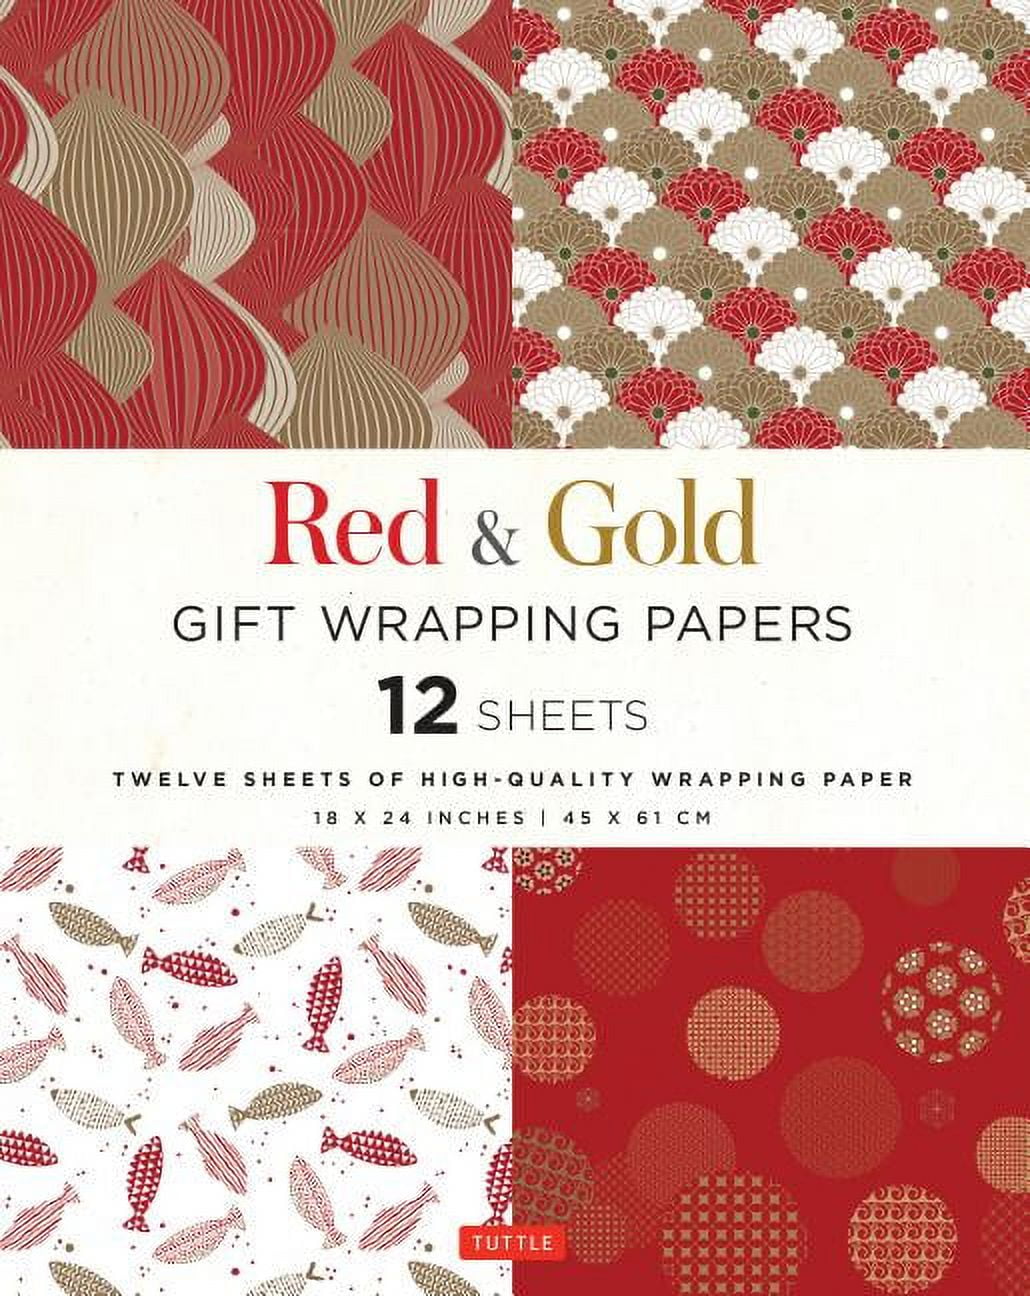 Black and Gold Gift Wrapping Papers - 12 Sheets: 18 X 24 Inch (45 X 61 Cm) Wrapping Paper